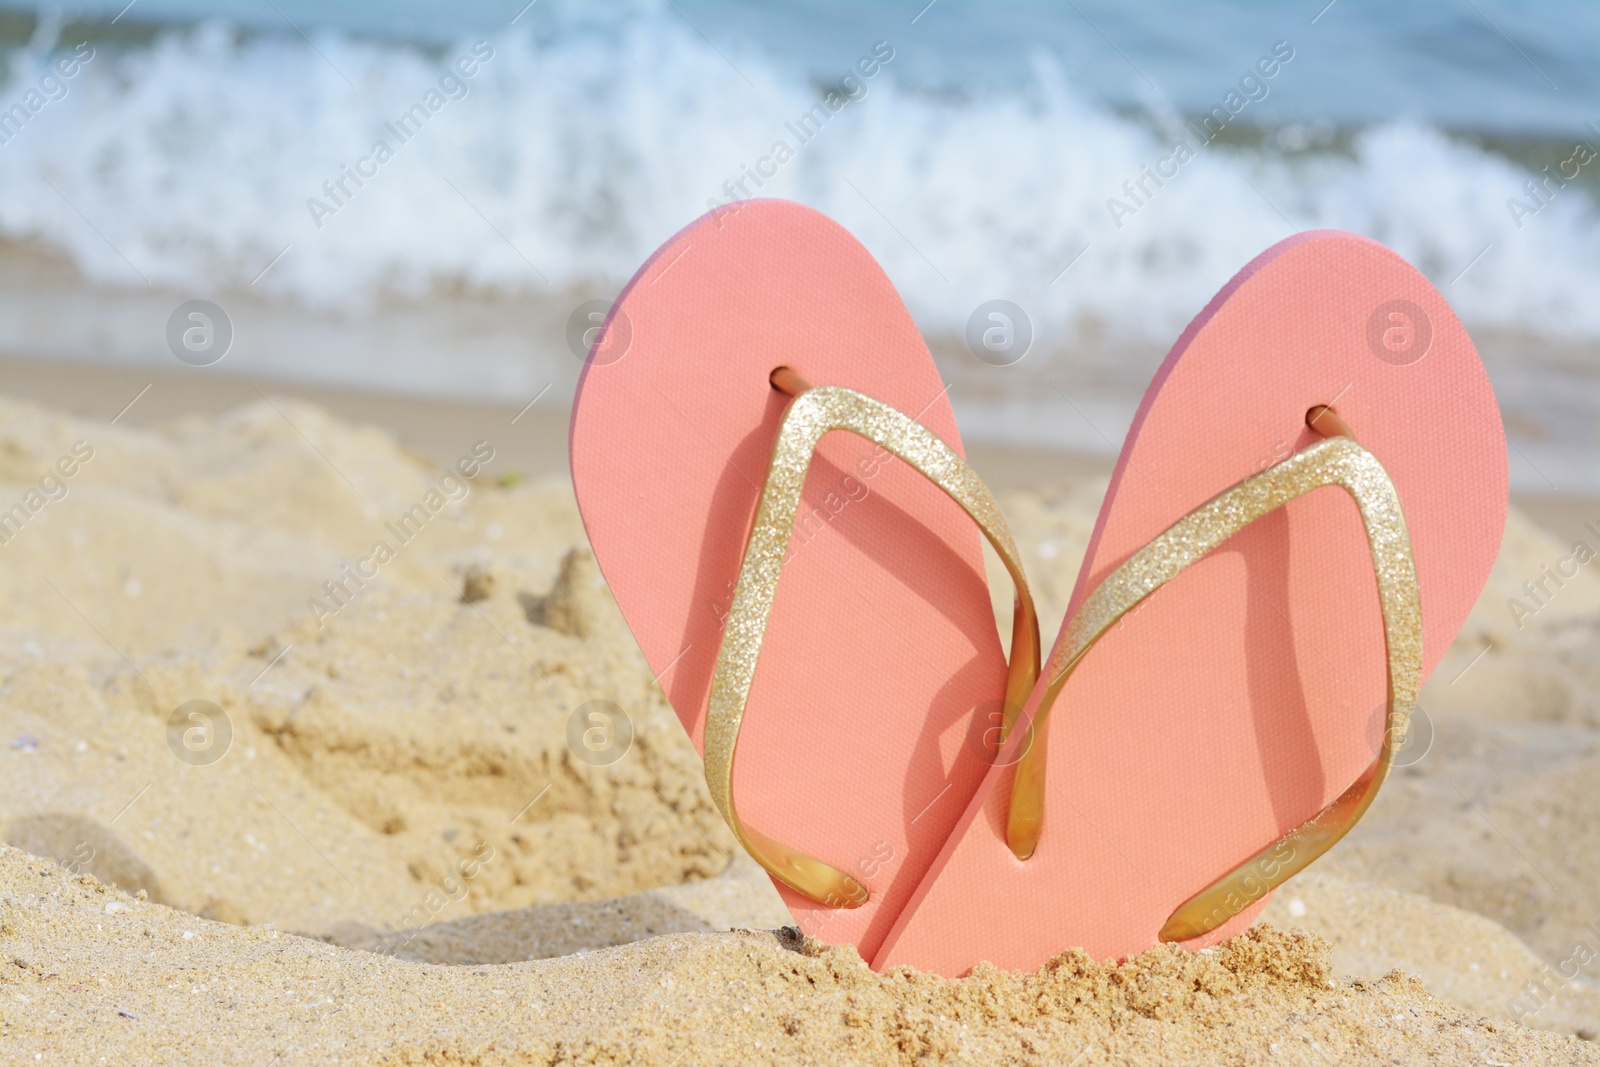 Photo of Stylish flip flops in sand on beach near sea, space for text